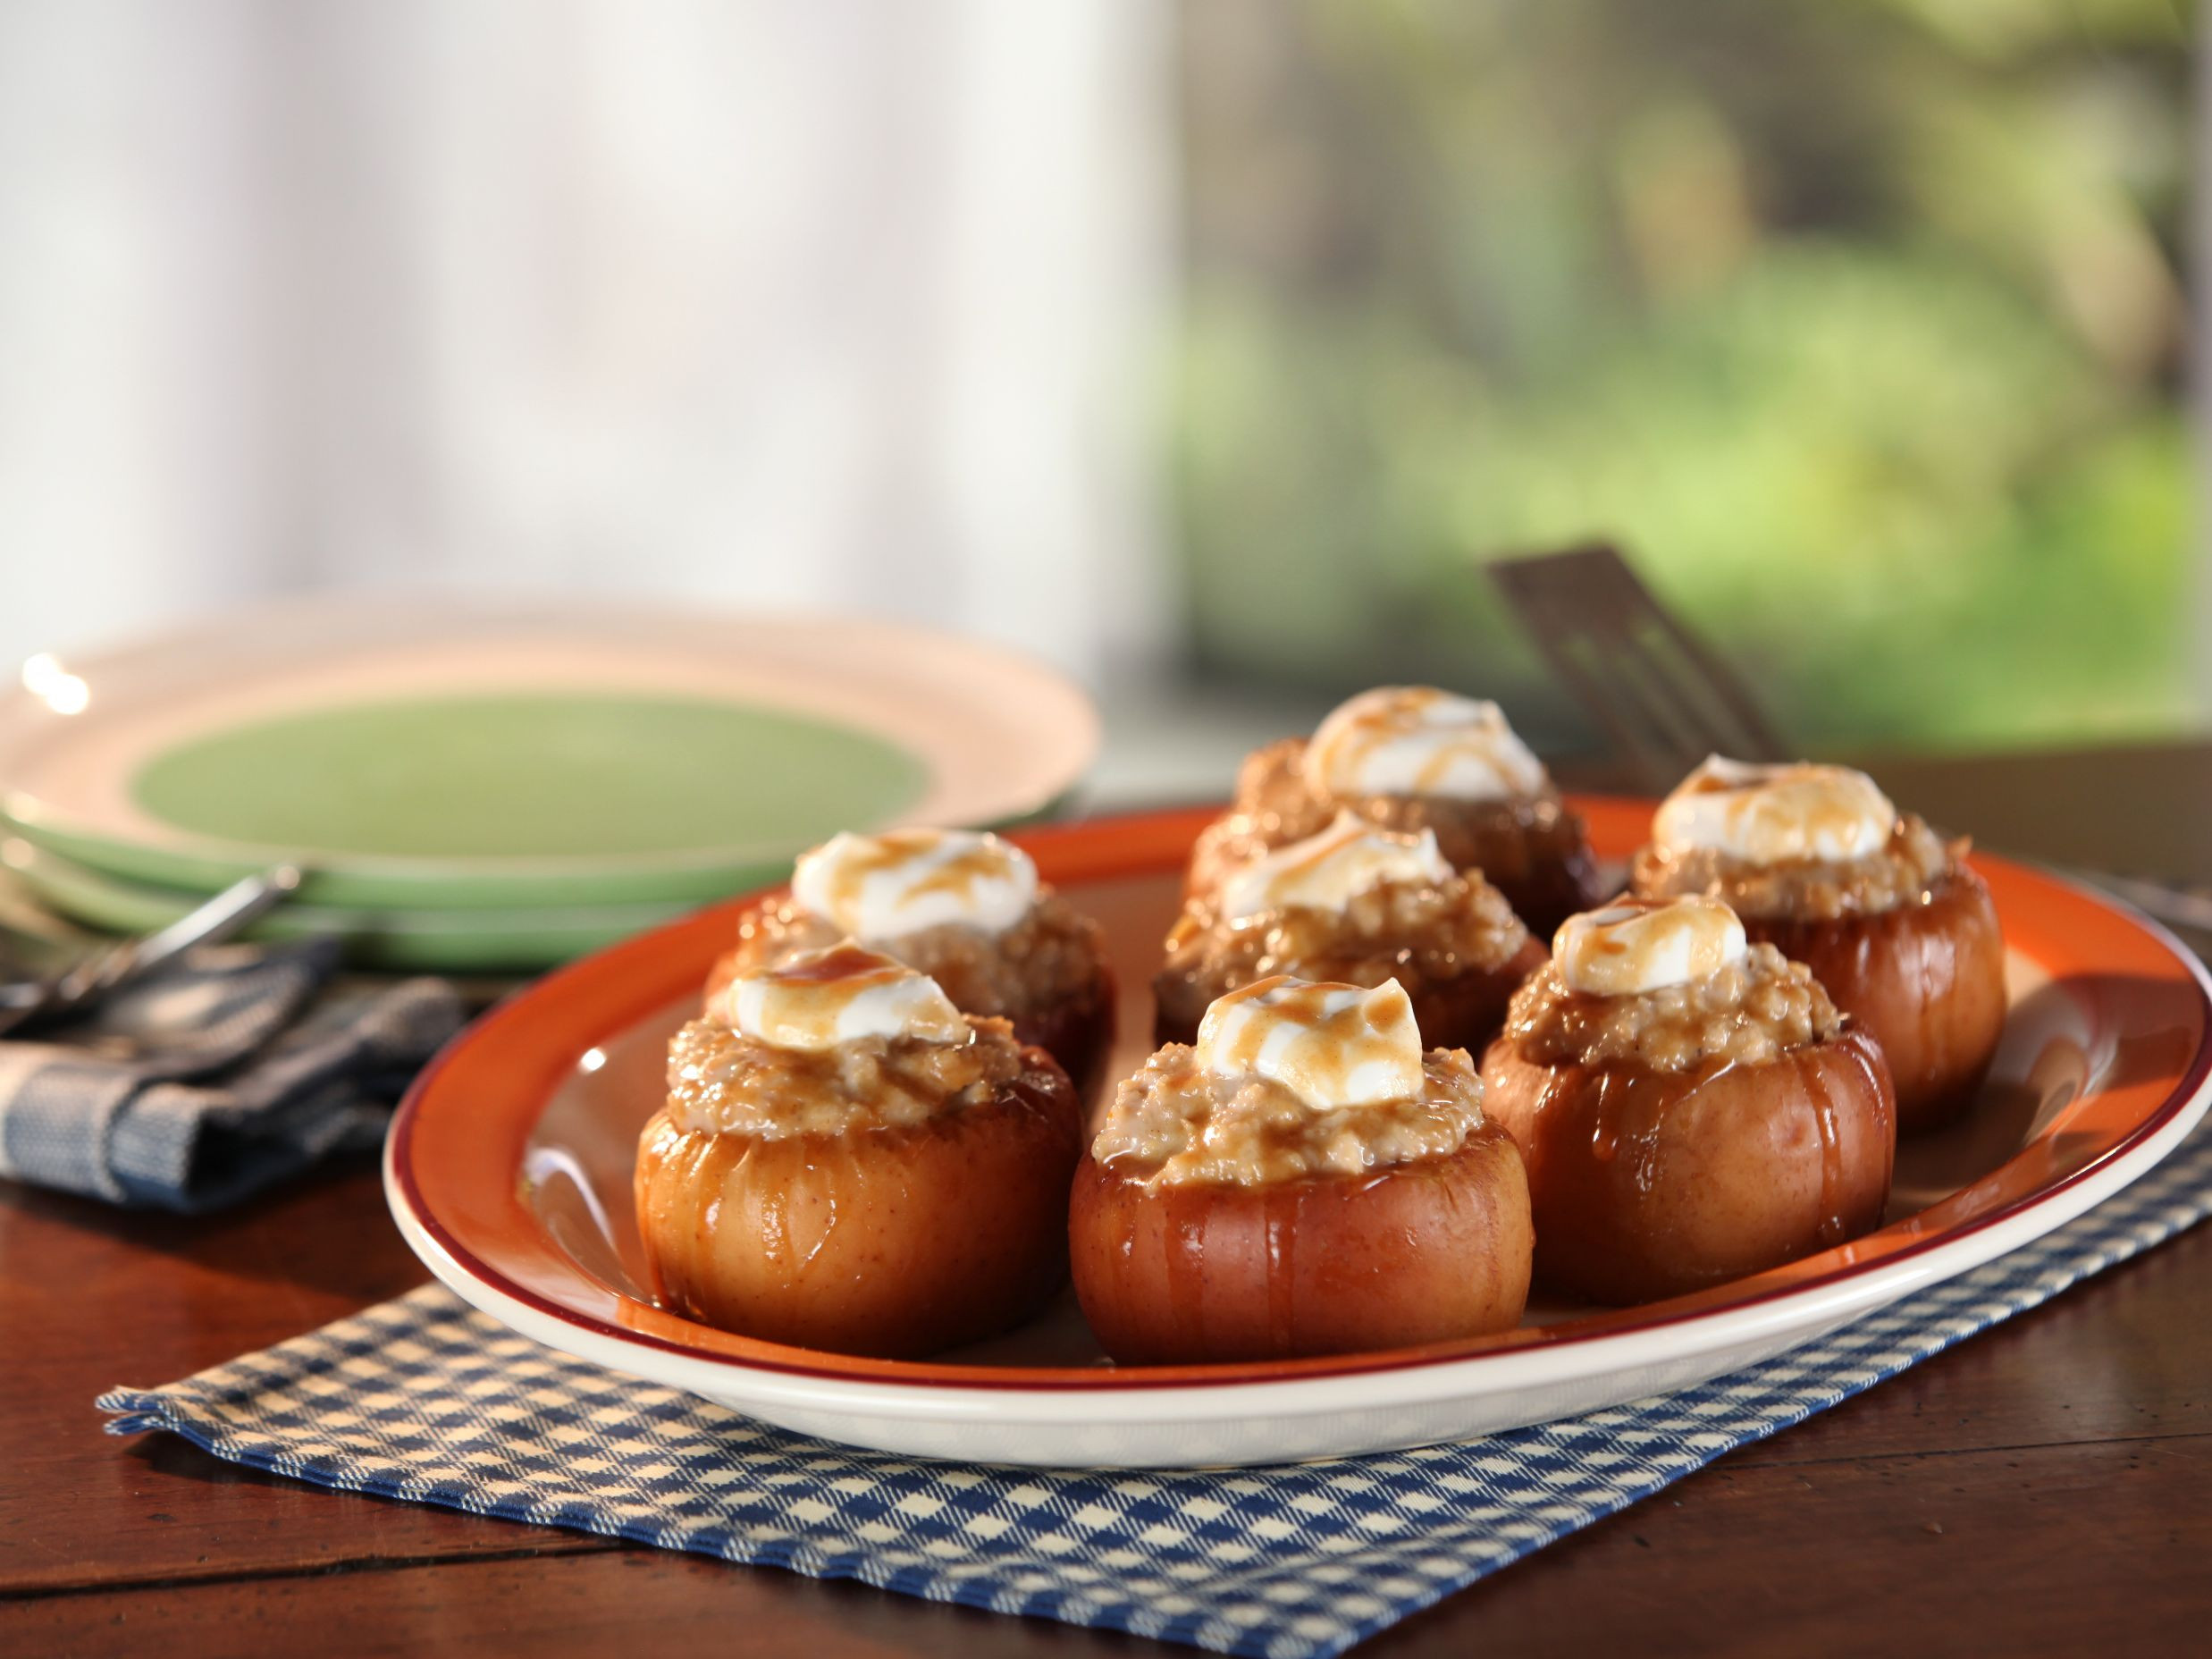 Brunch Desserts Food Network
 Baked Apples with Oatmeal and Yogurt Recipe